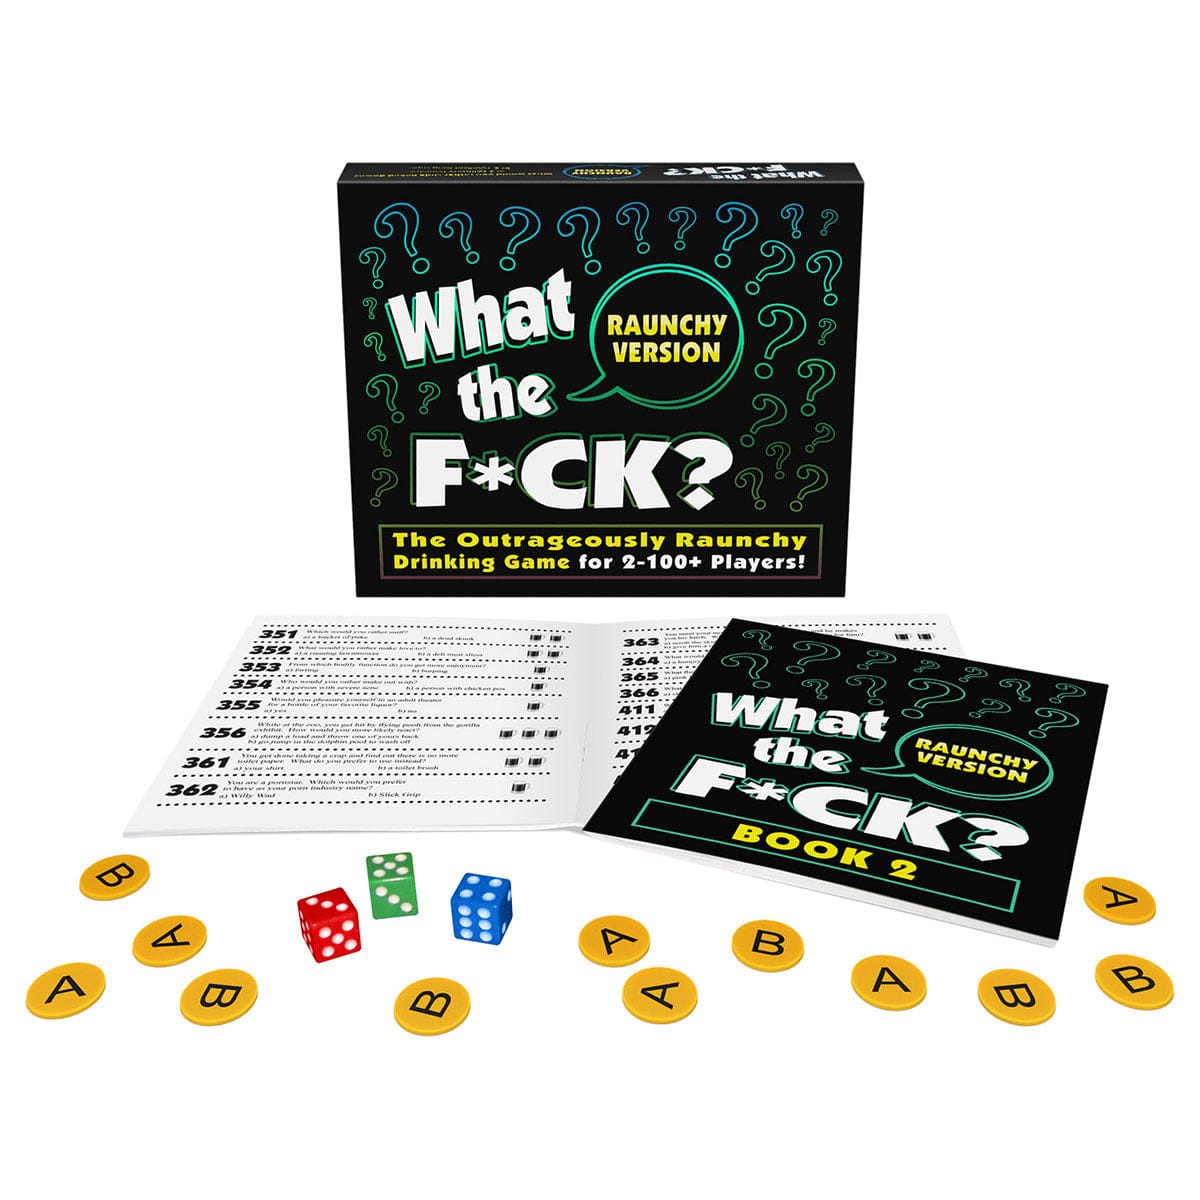 Kheper Games™ What the F*ck? Raunchy Version - The Outrageously Raunchy Drinking Game - Rolik®